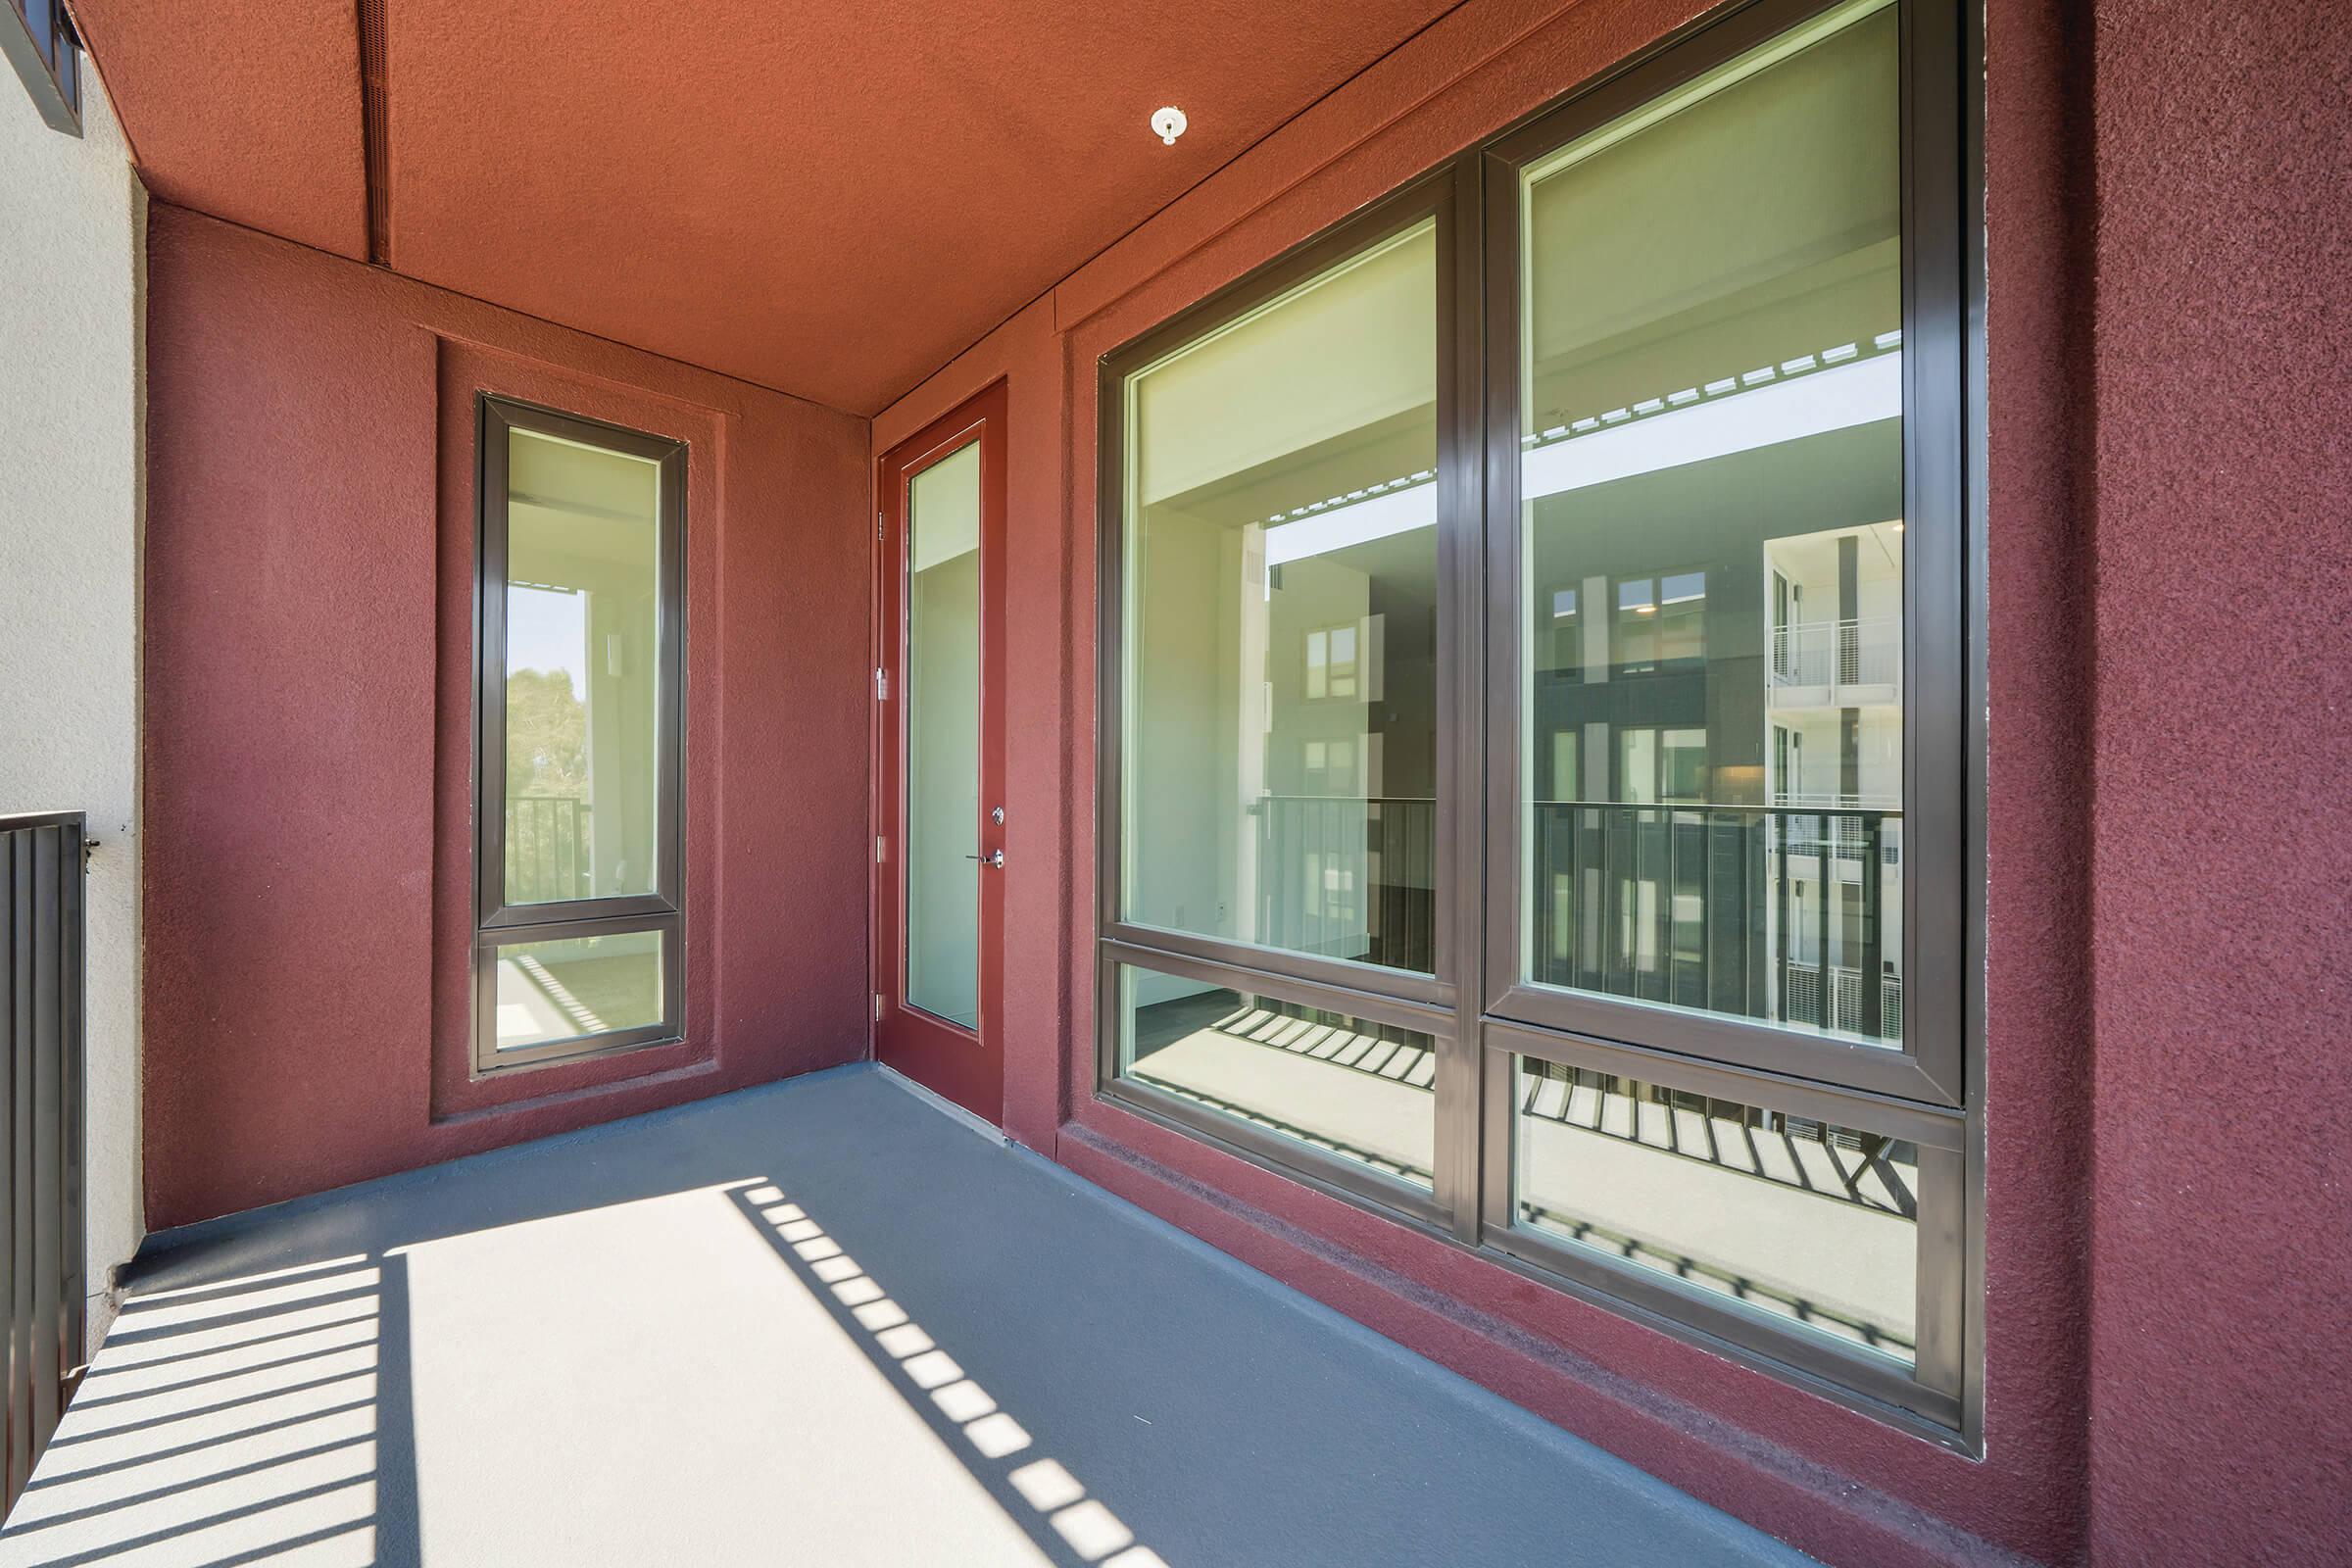 Patio with red walls